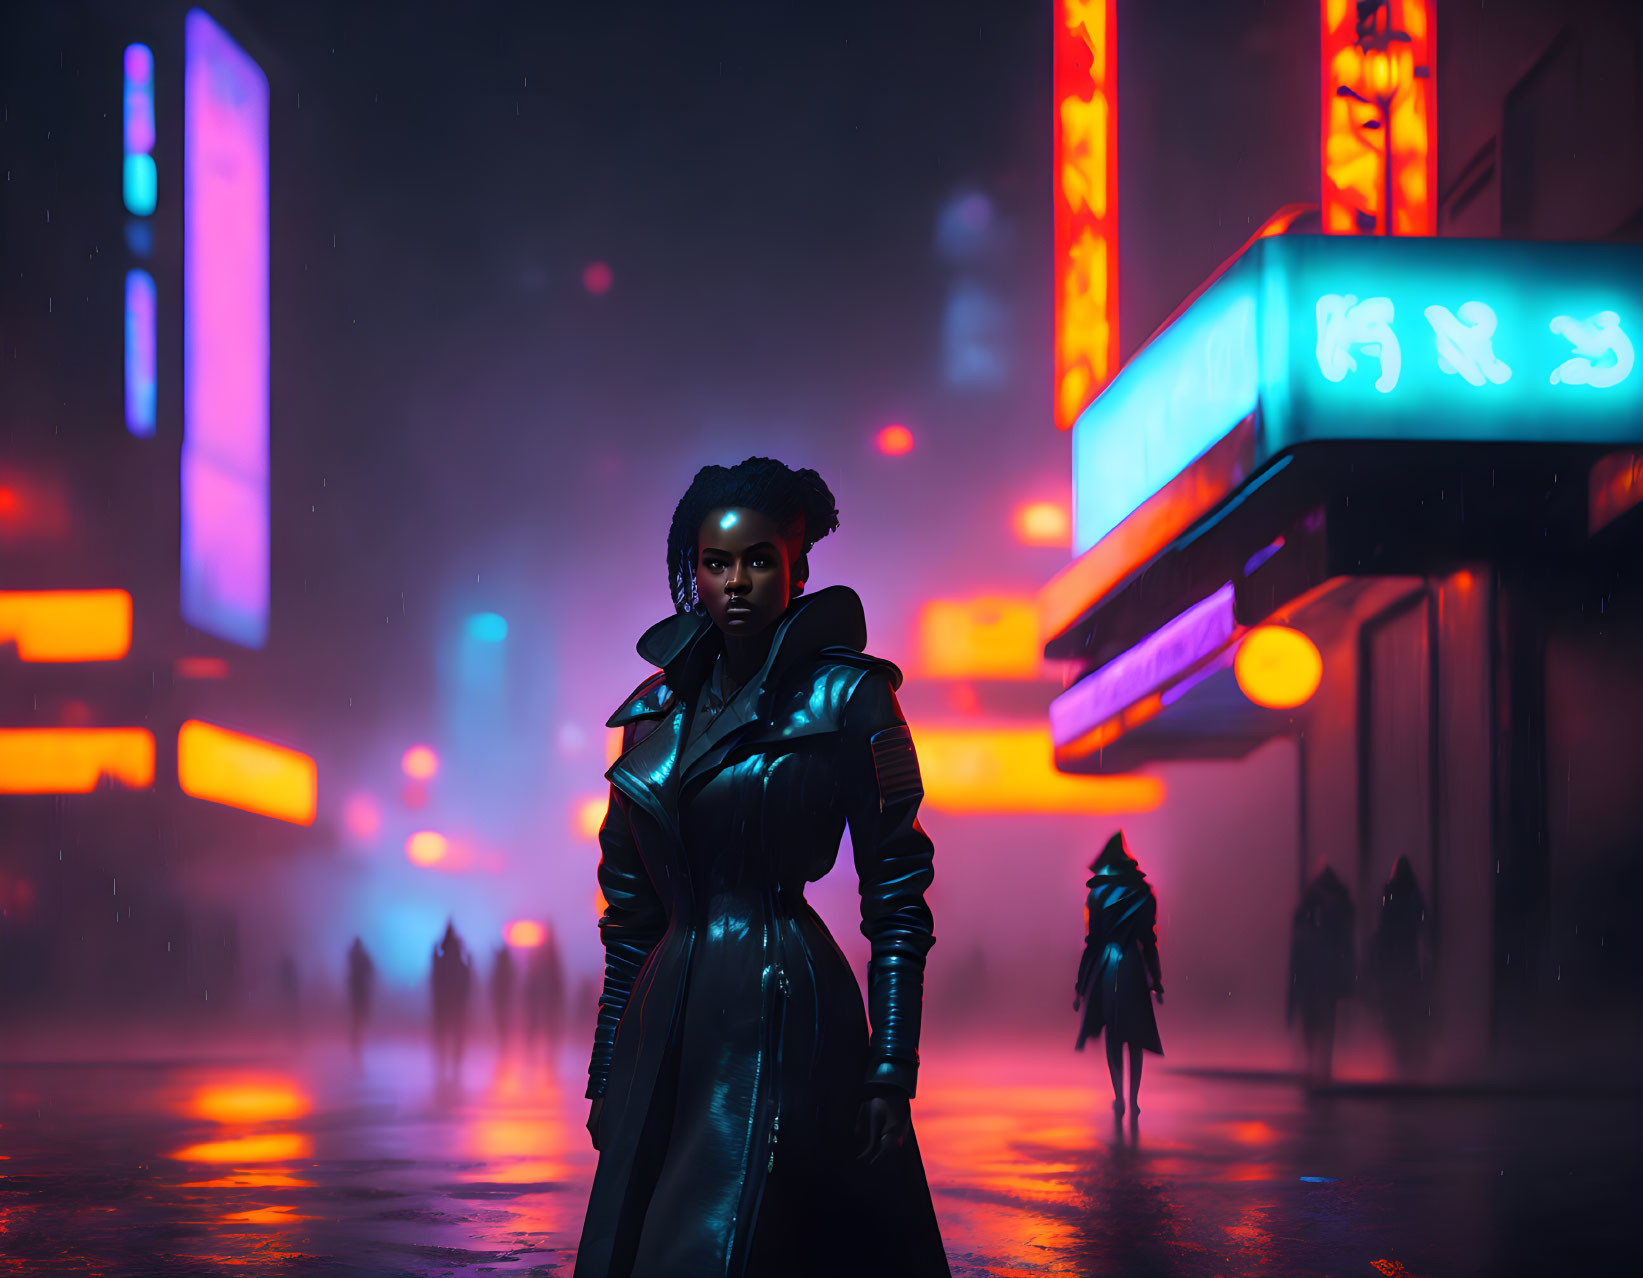 Futuristic woman in black outfit under neon lights at night